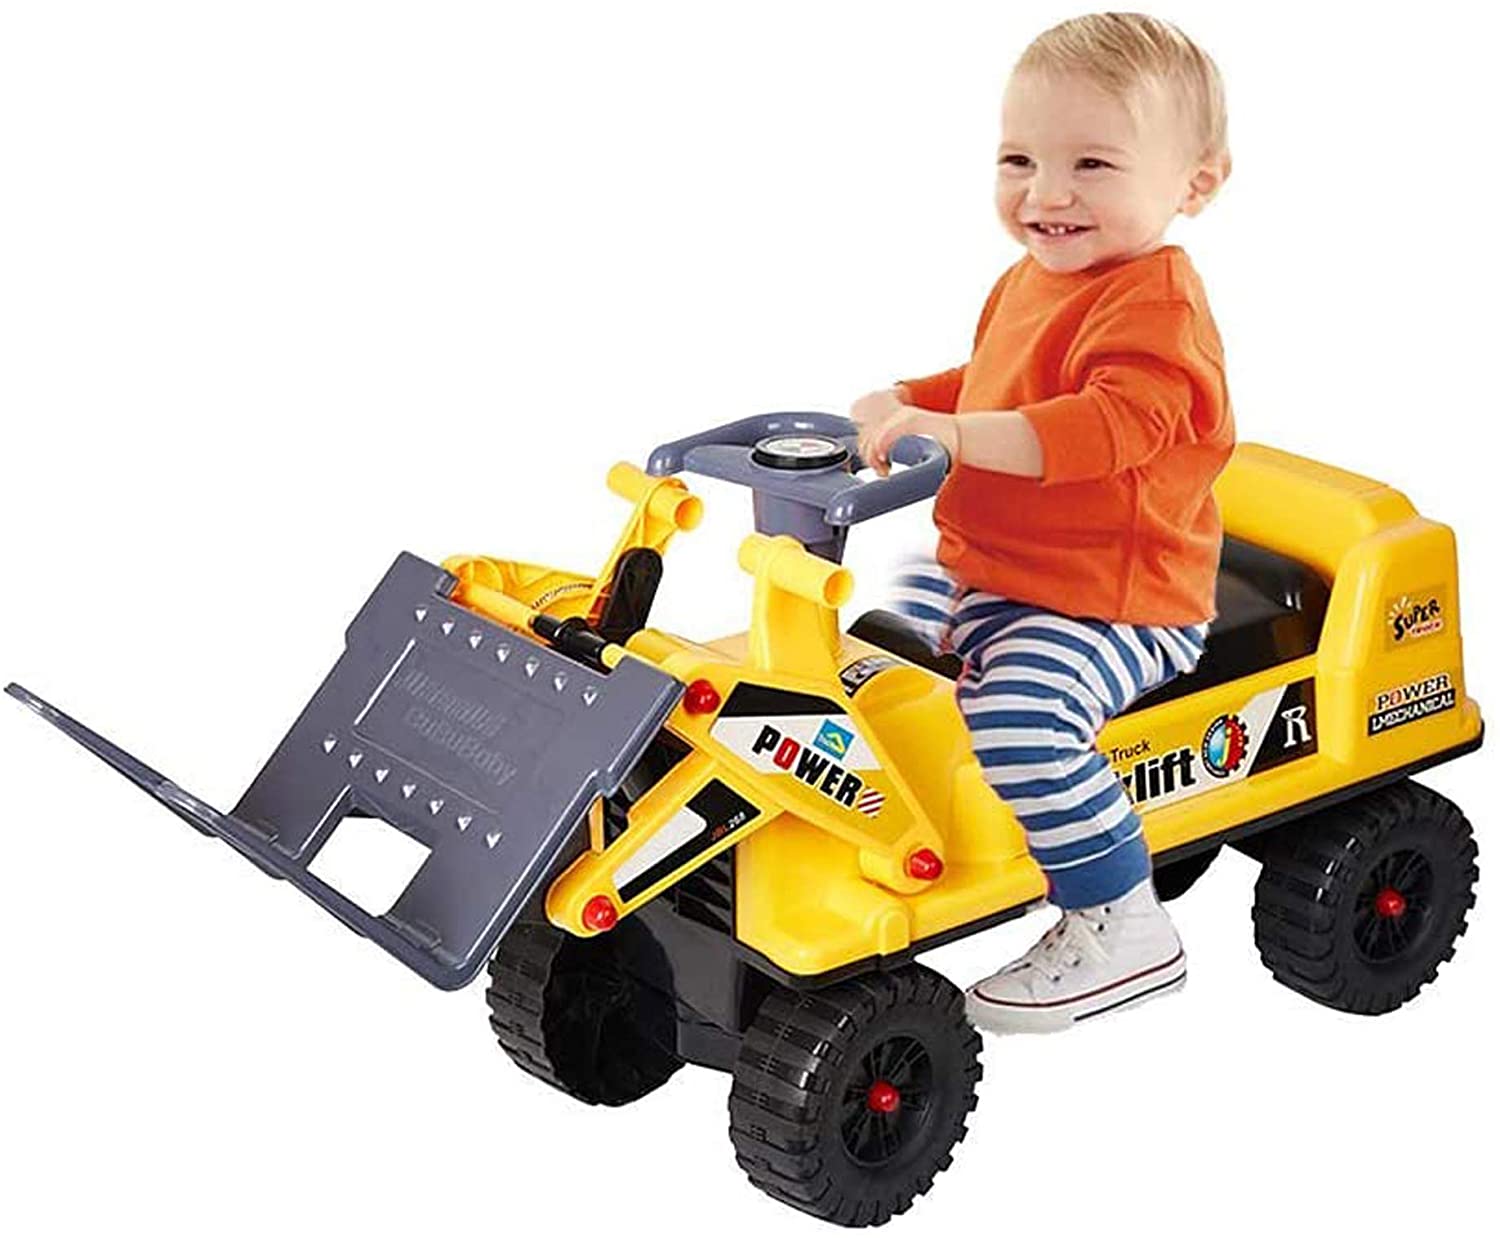 Ride-on Forklift Construction Truck Toy for Children,Sound, Lifting, Loading and Unloading, Sliding Function